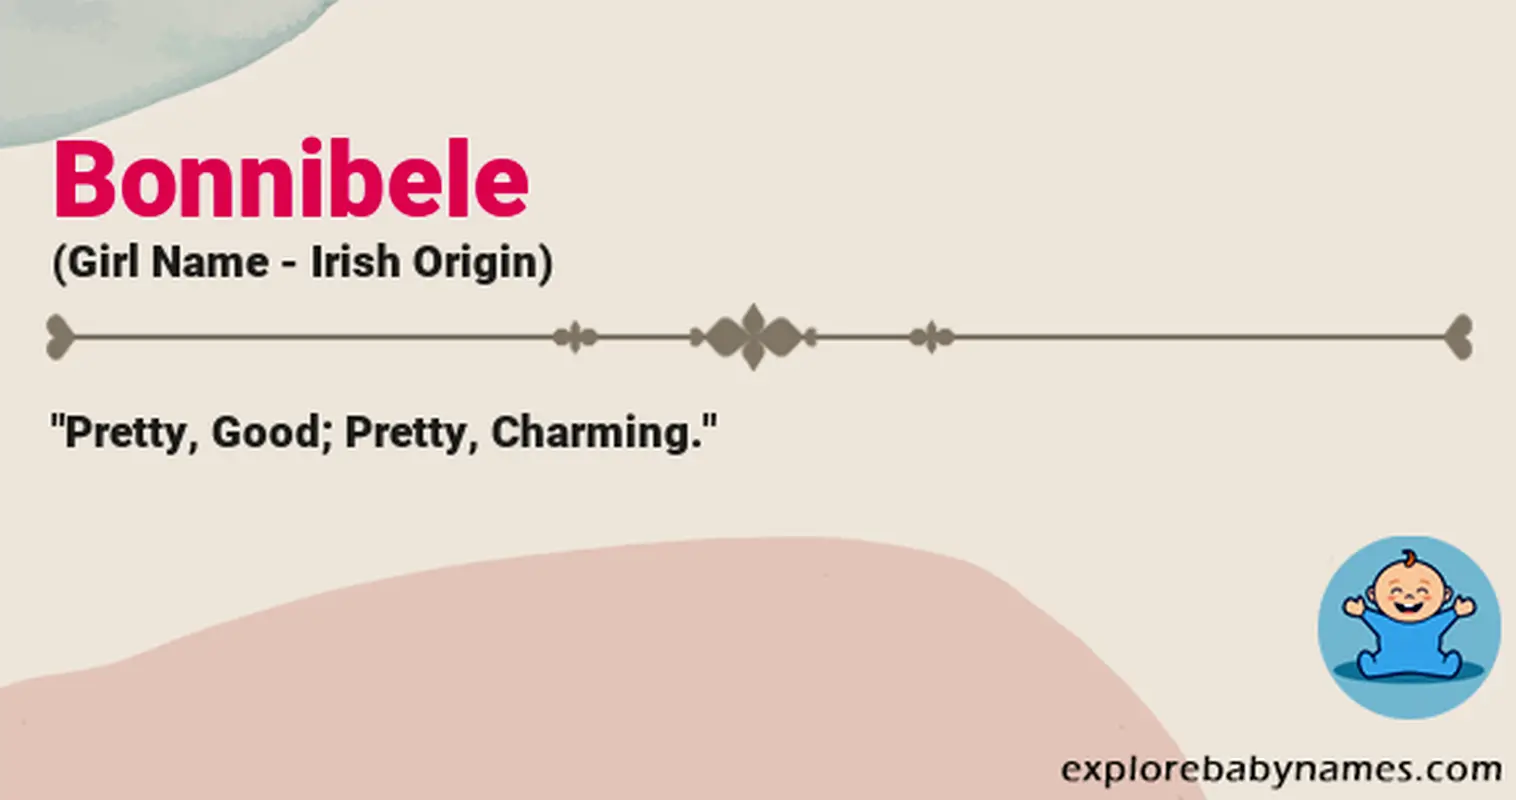 Meaning of Bonnibele